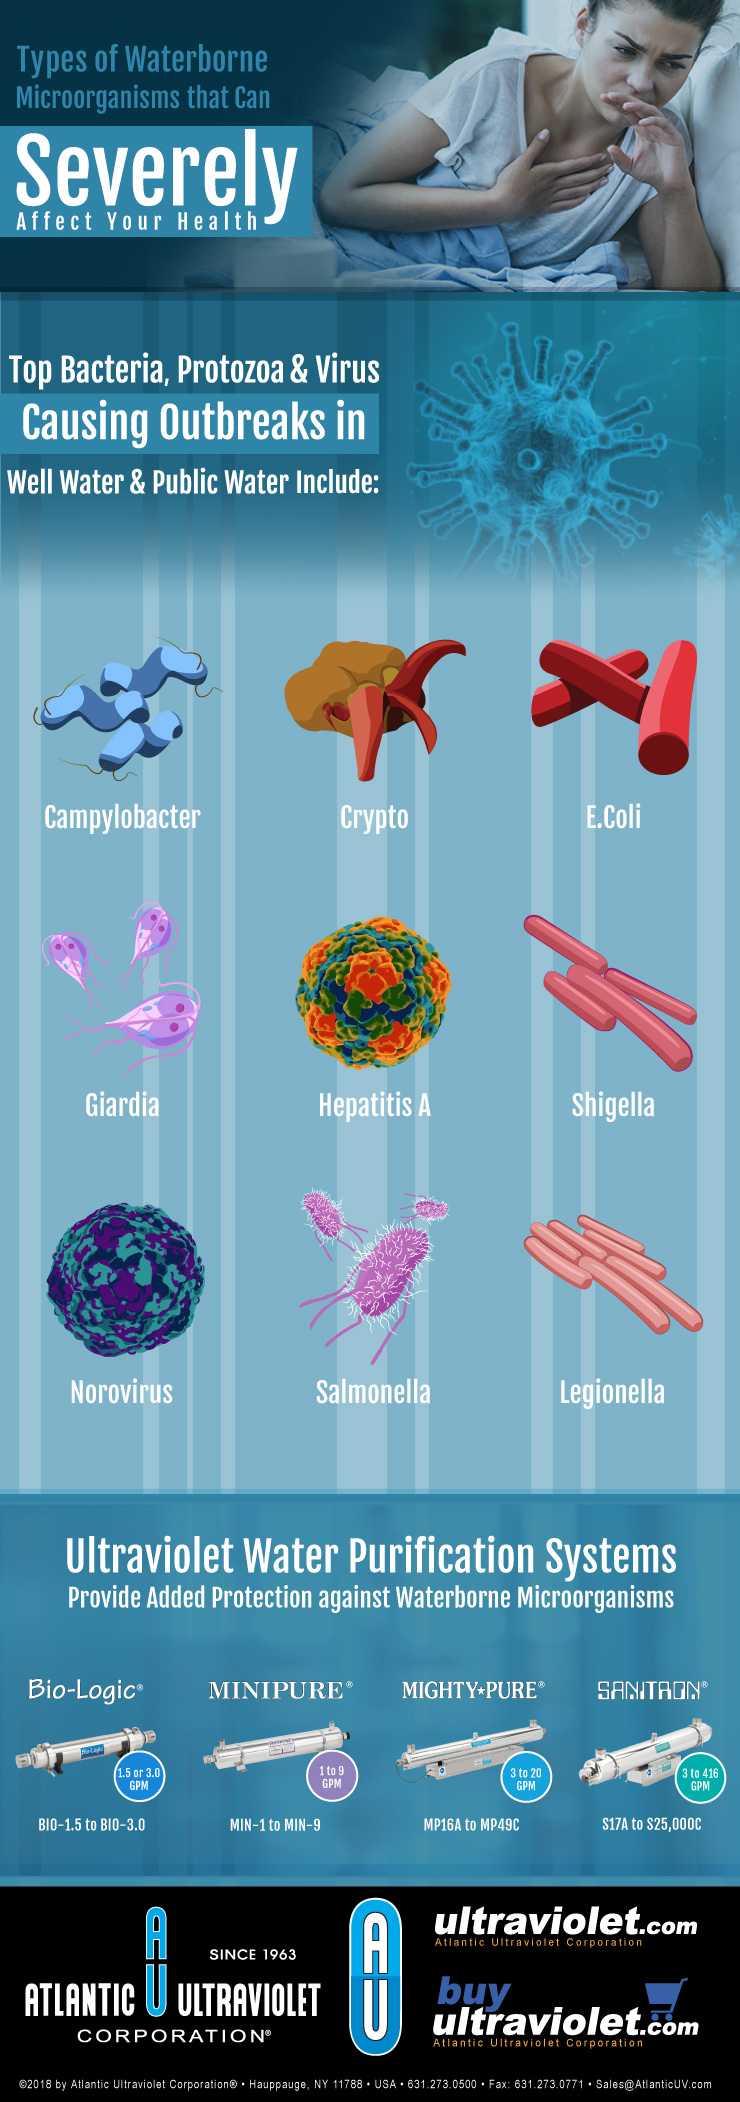 Types of Waterborne Microorganisms Infographic